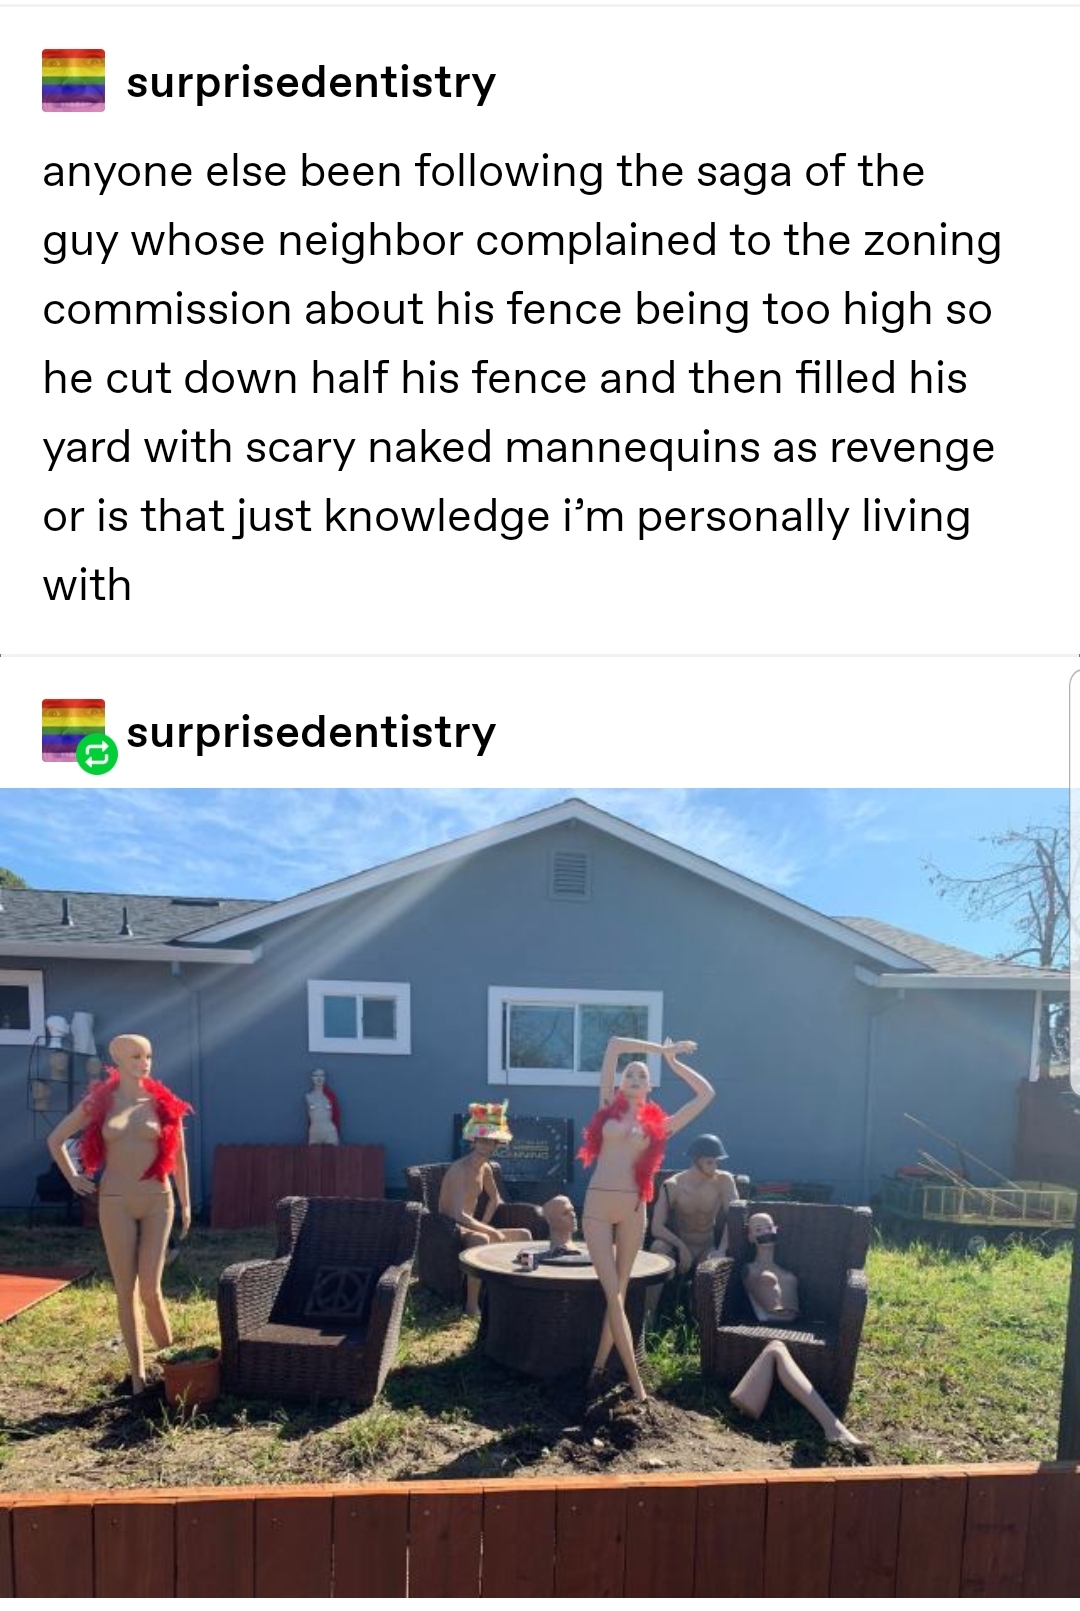 water - surprisedentistry anyone else been ing the saga of the guy whose neighbor complained to the zoning commission about his fence being too high so he cut down half his fence and then filled his yard with scary naked mannequins as revenge or is that j